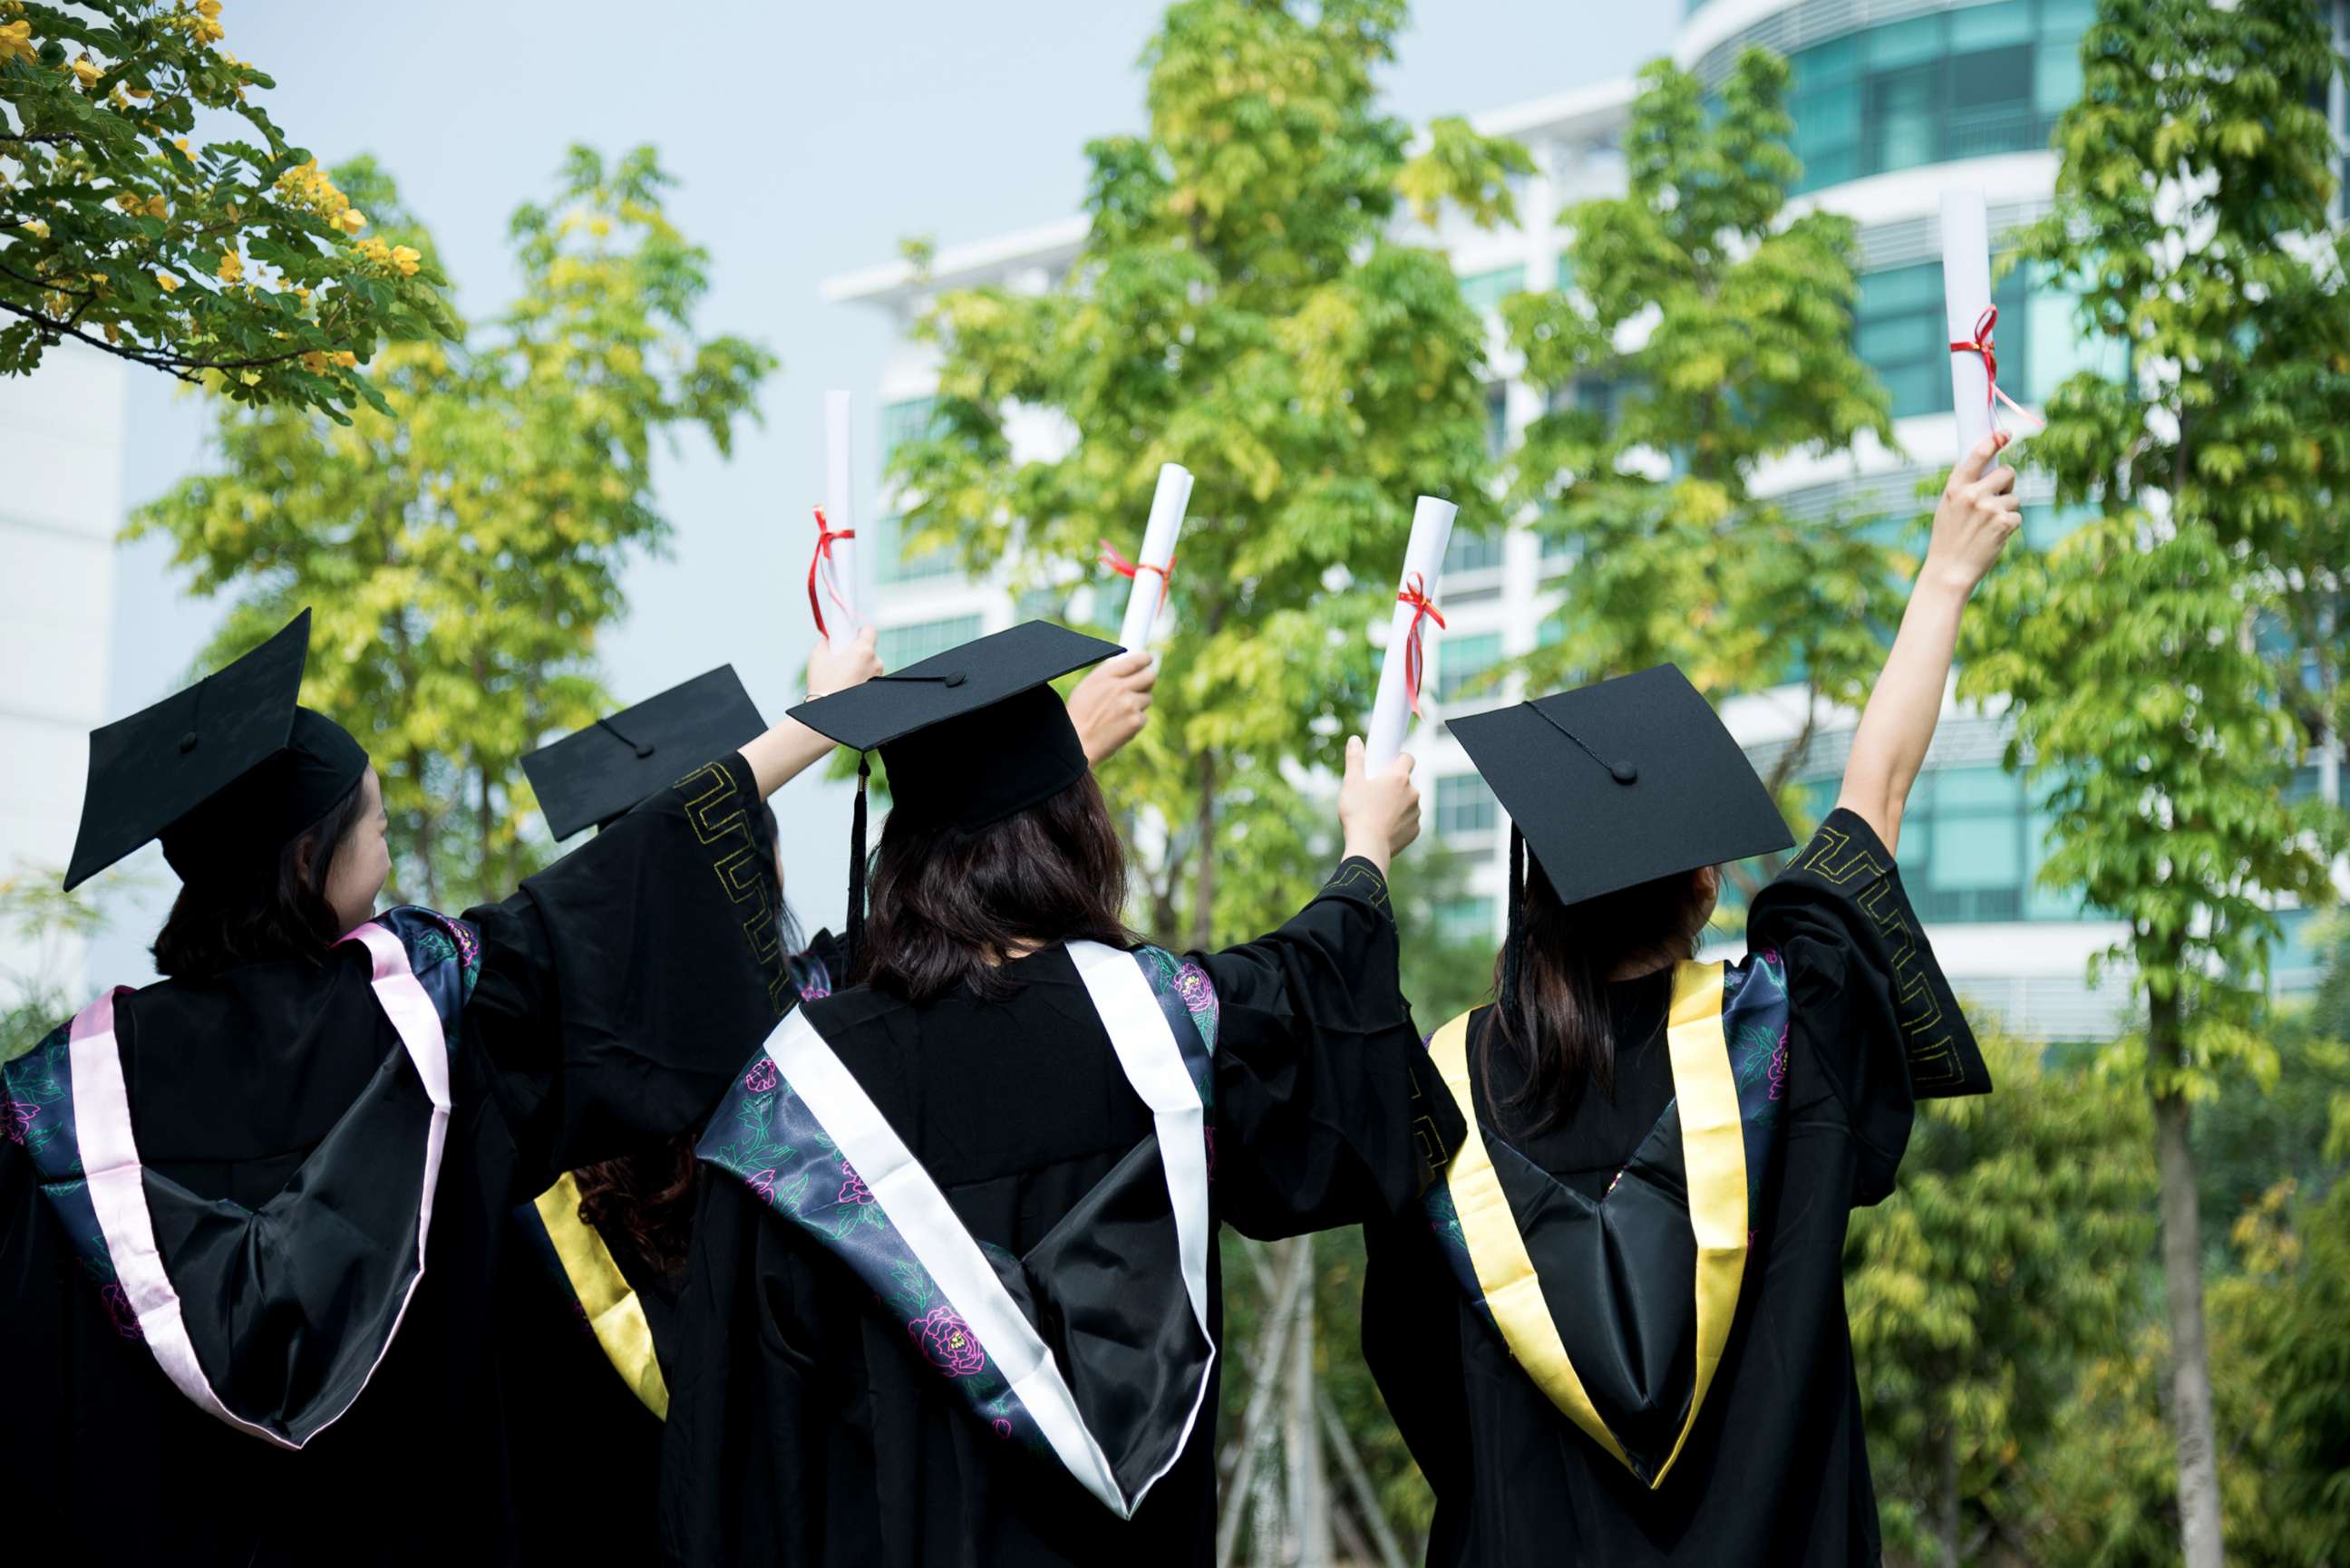 PHOTO: A rear view of female graduates wearing graduation caps and gowns at campus is captured in this undated stock photo.